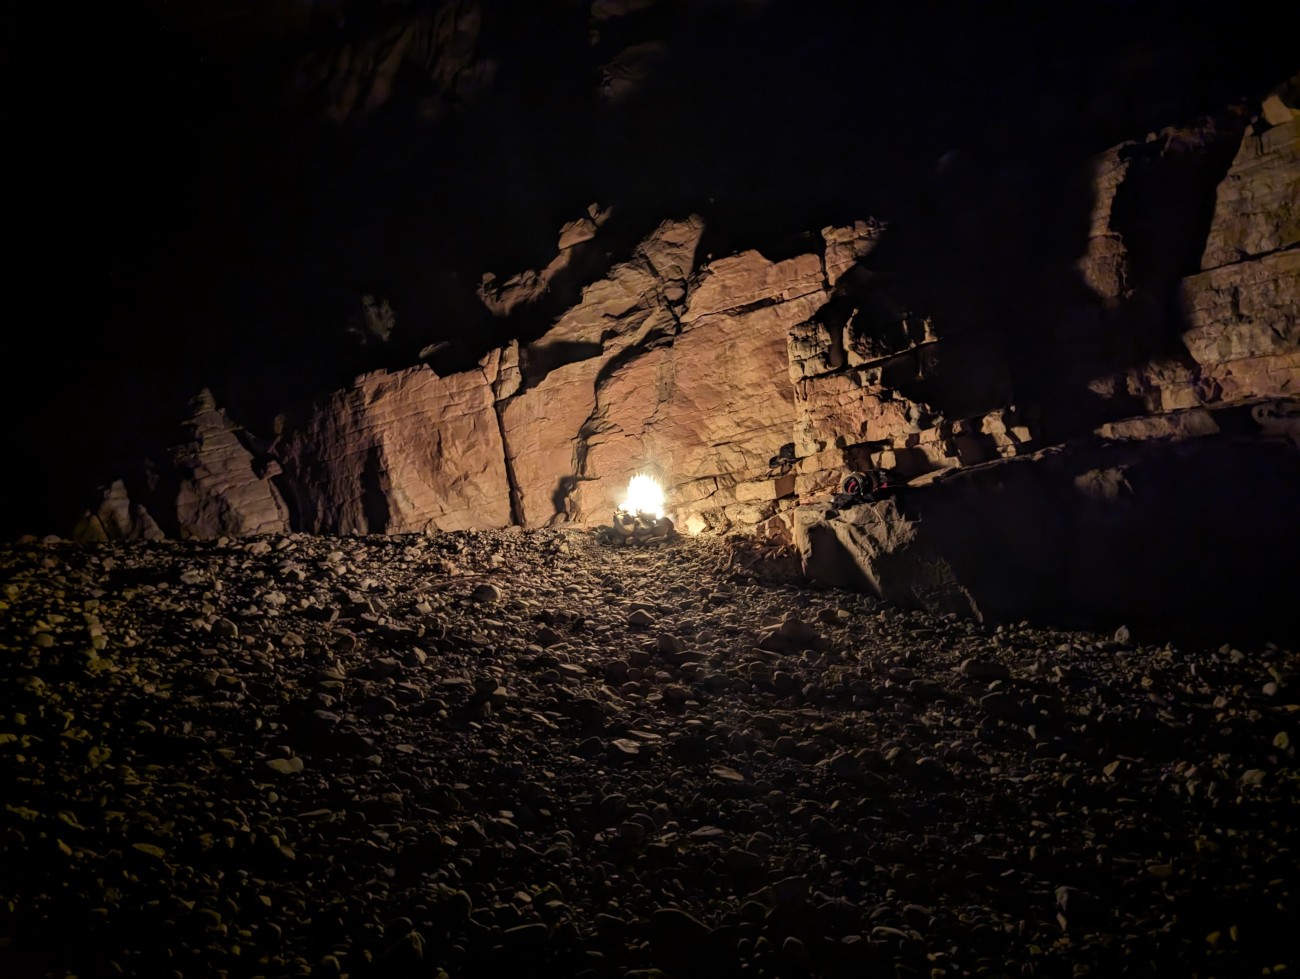 A fire against a rock background at night